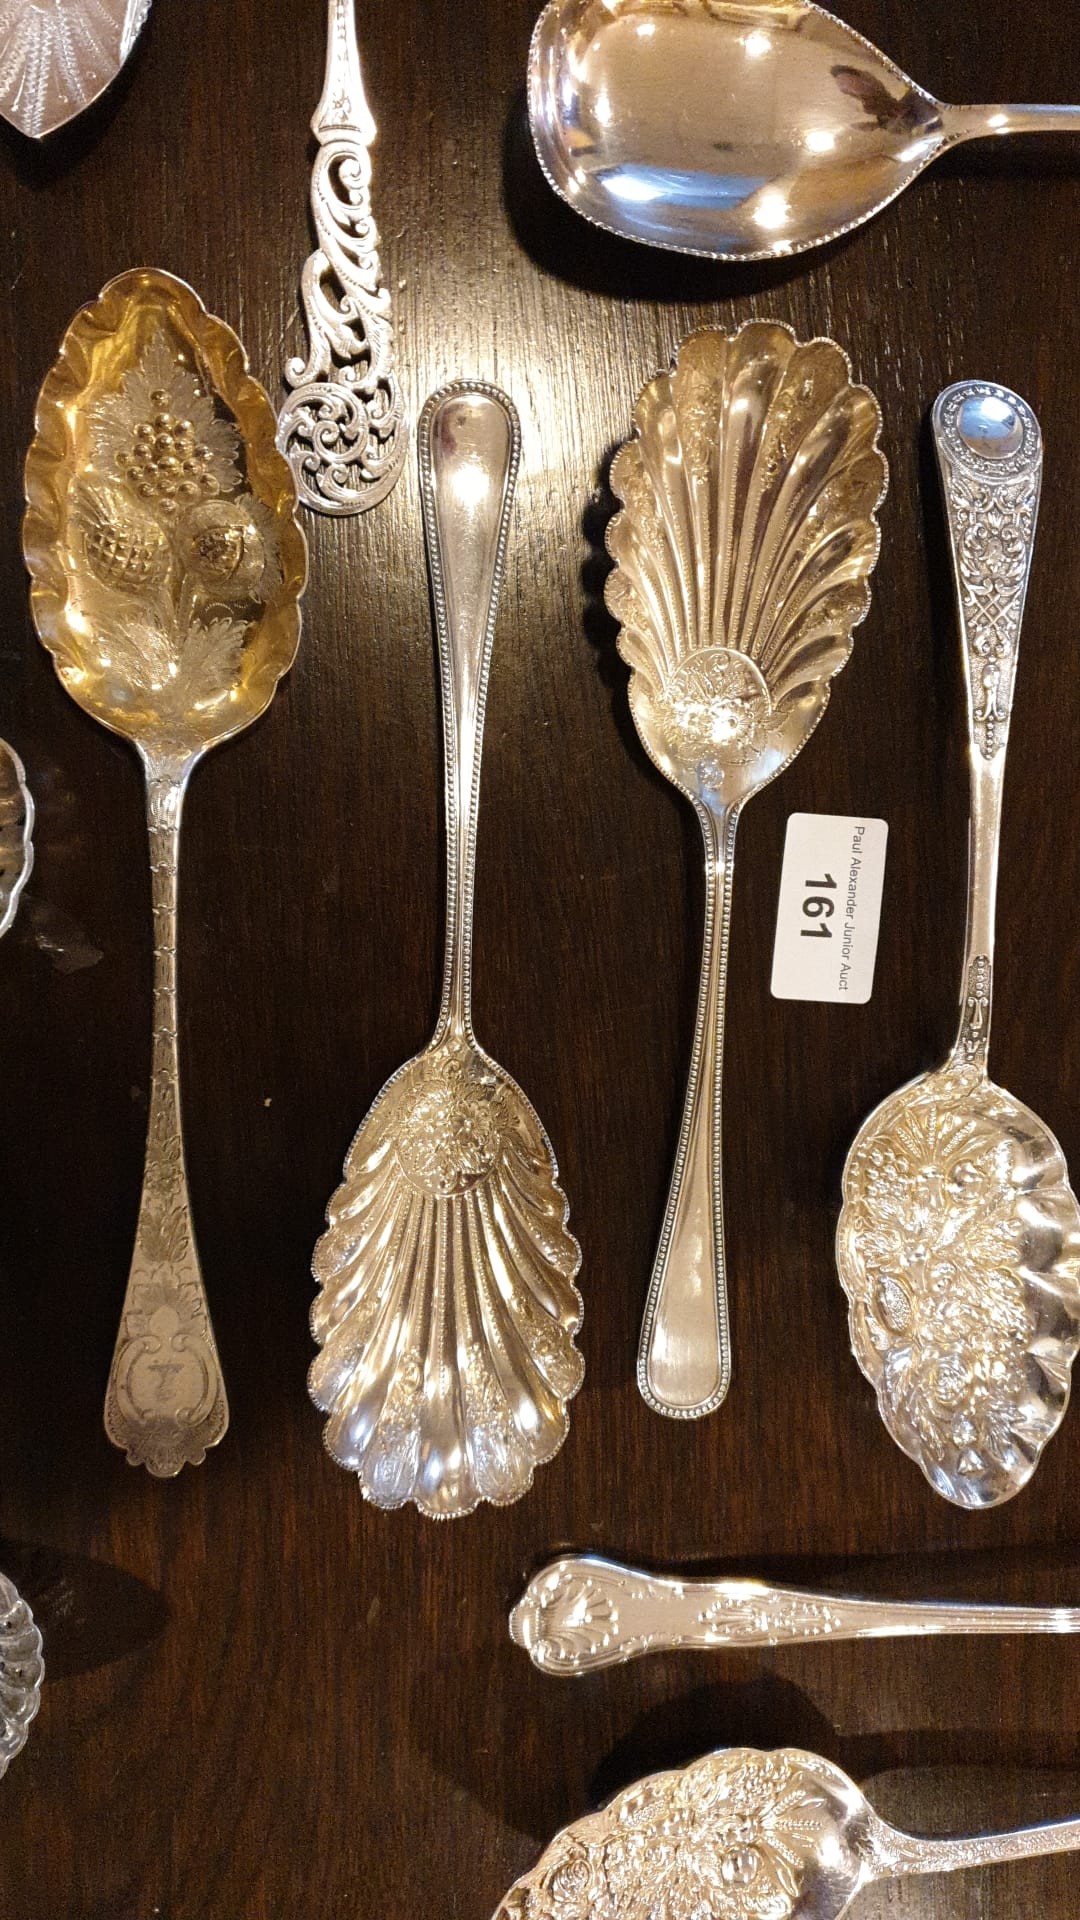 Large selection Berry Spoons Serving spoons Sifting ladles ect . - Image 5 of 5